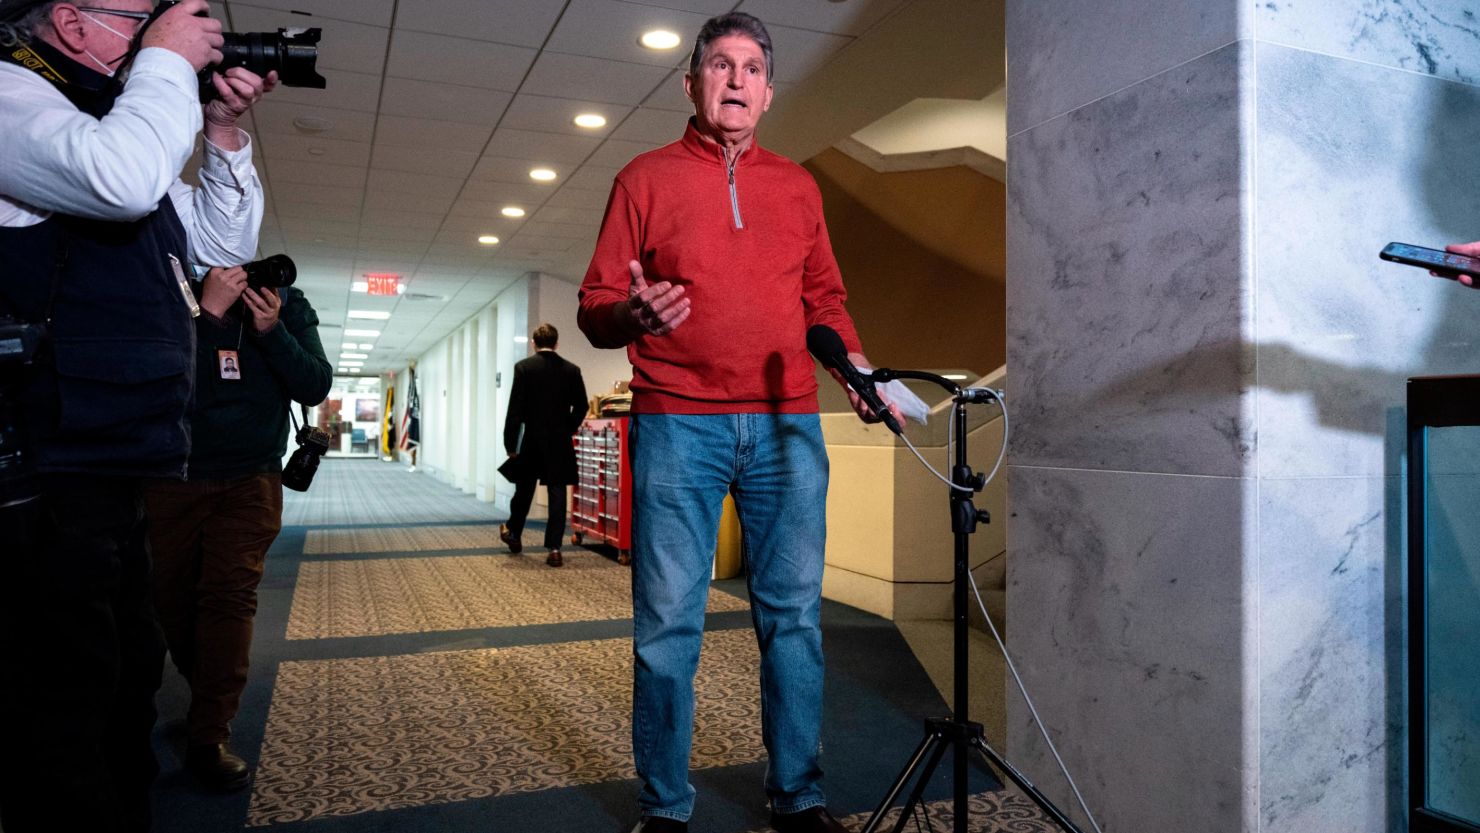 Sen. Joe Manchin, D-W.Va., speaks to reporters before a caucus meeting with fellow Senate Democrats on Capitol Hill January 18, 2022 in Washington.